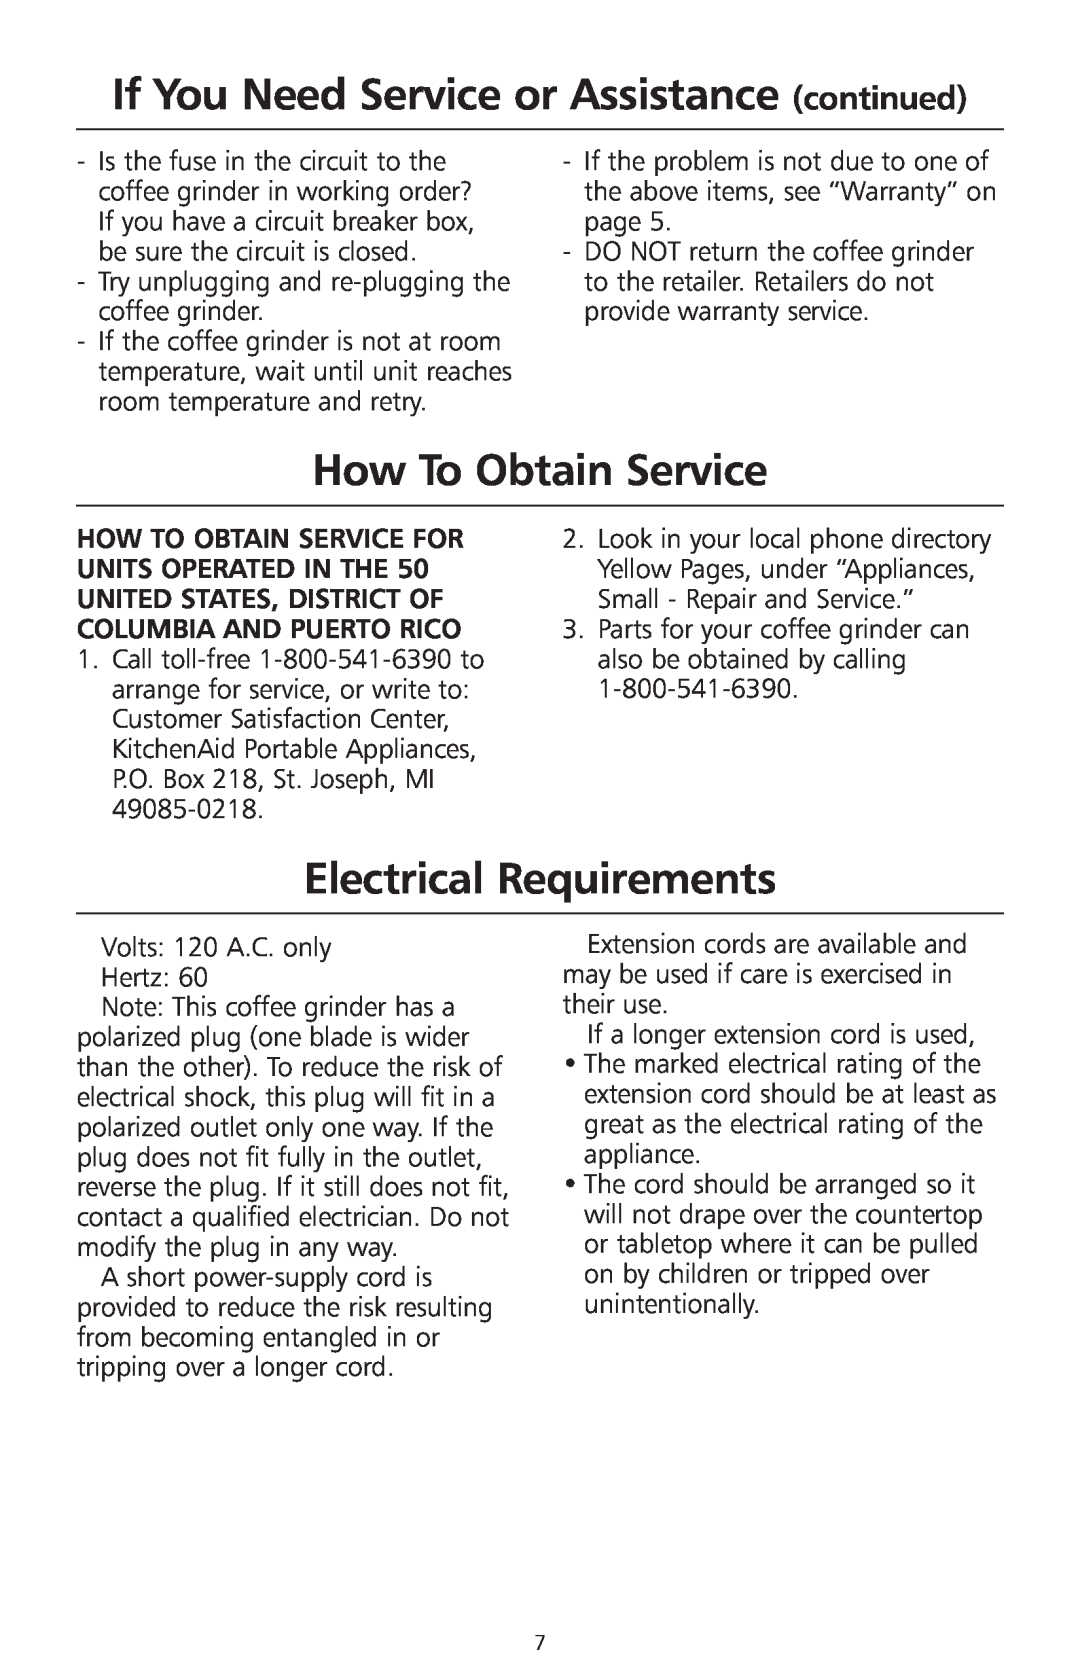 KitchenAid 2633 manual If You Need Service or Assistance continued, How To Obtain Service, Electrical Requirements 